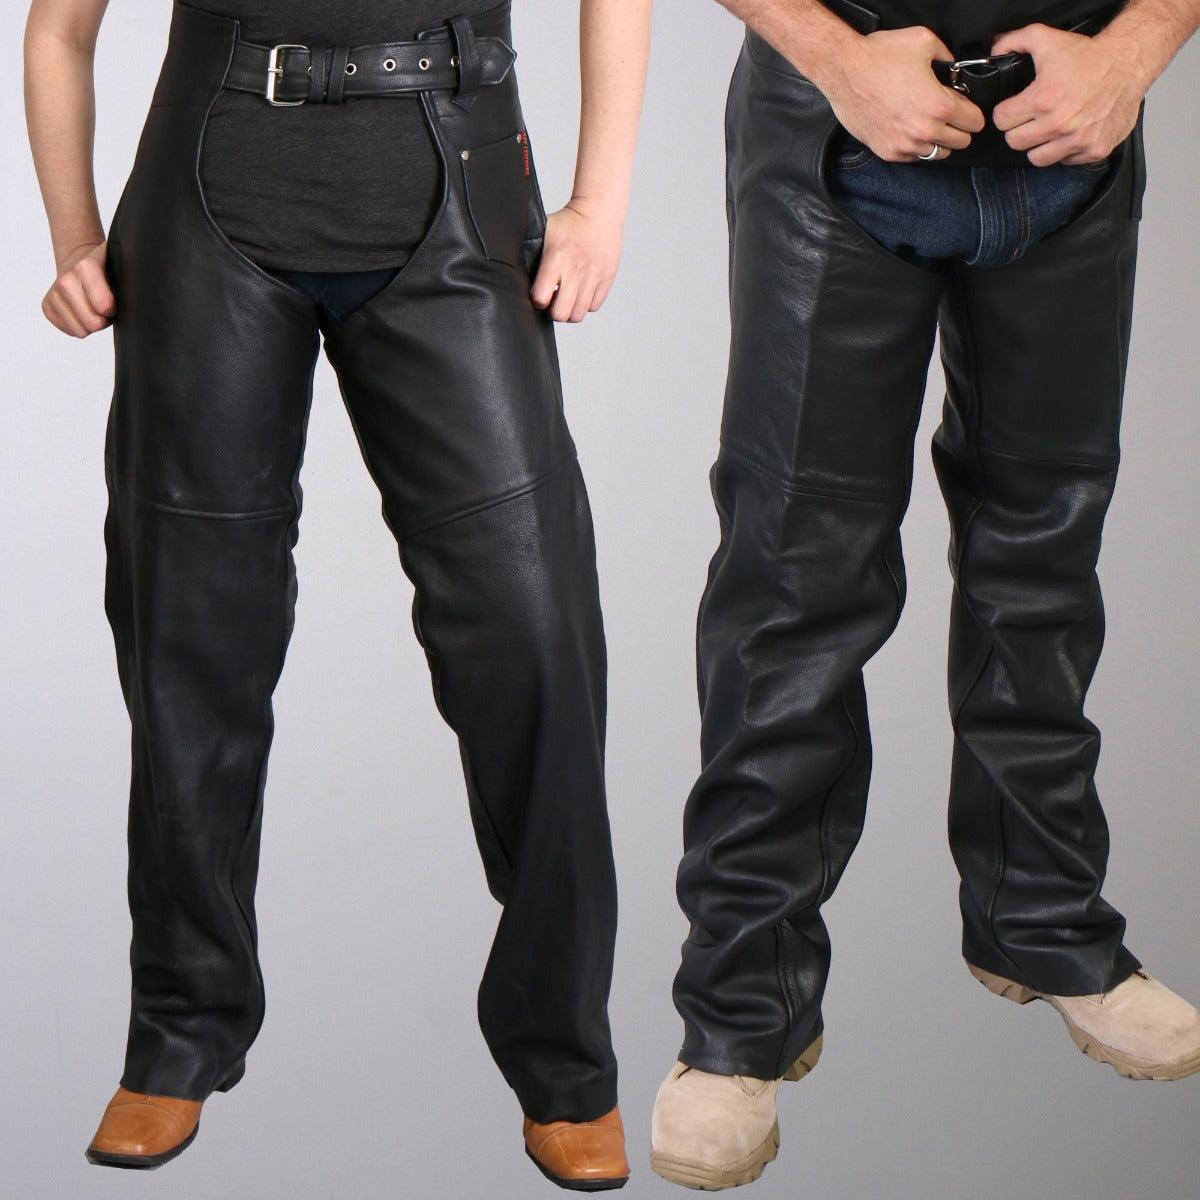 Hot Leathers Unisex Naked Leather Chaps - American Legend Rider